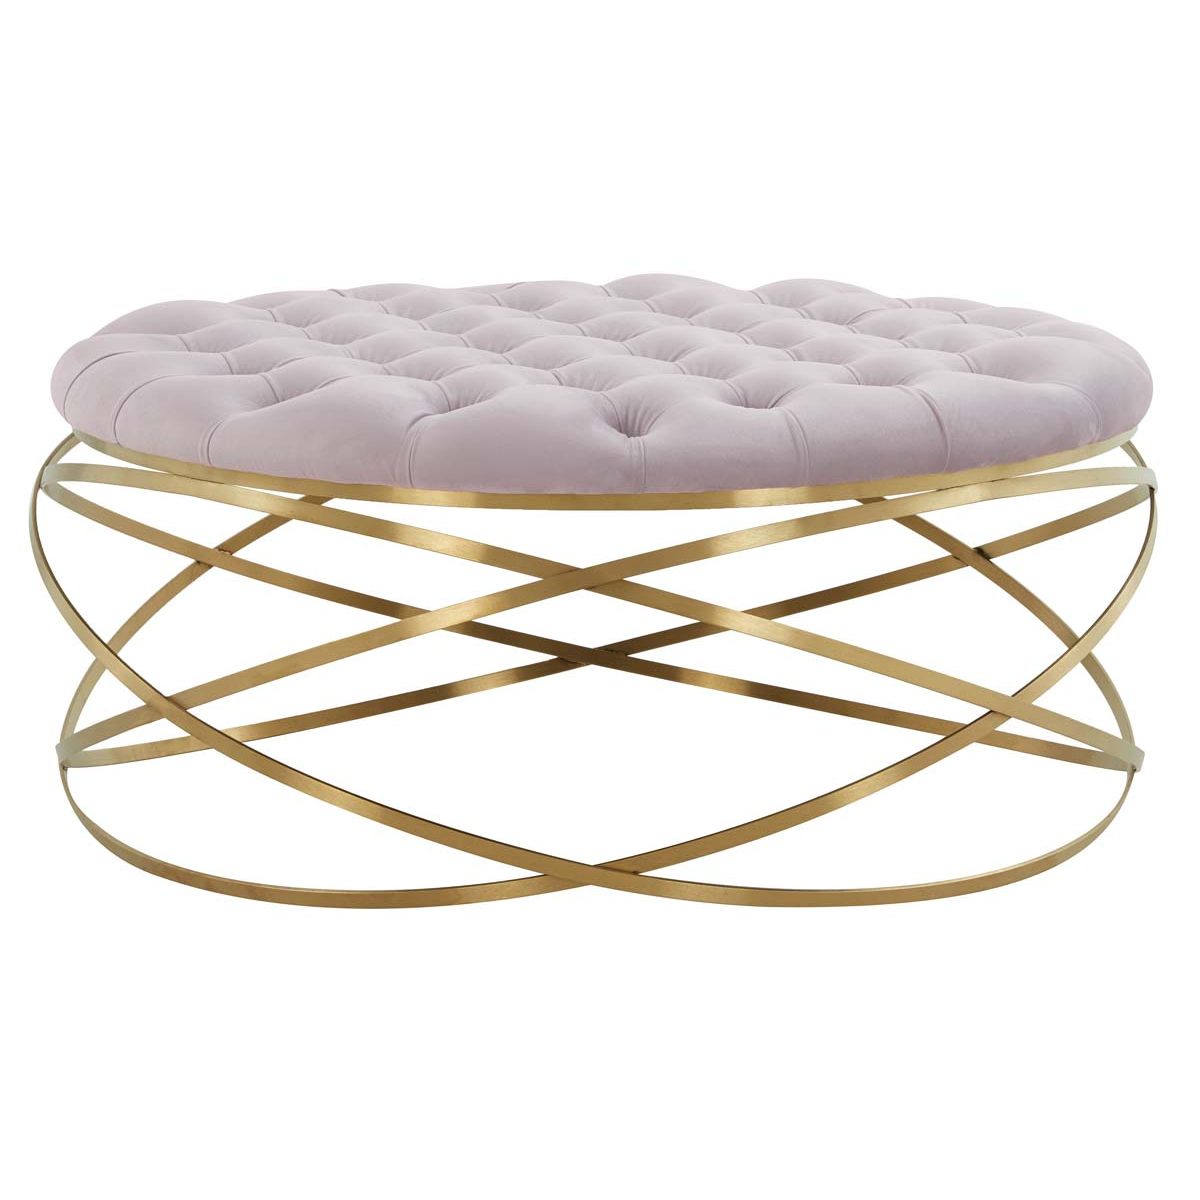 Safavieh Couture Rumi Tufted Velvet Ottoman - Pale Taupe